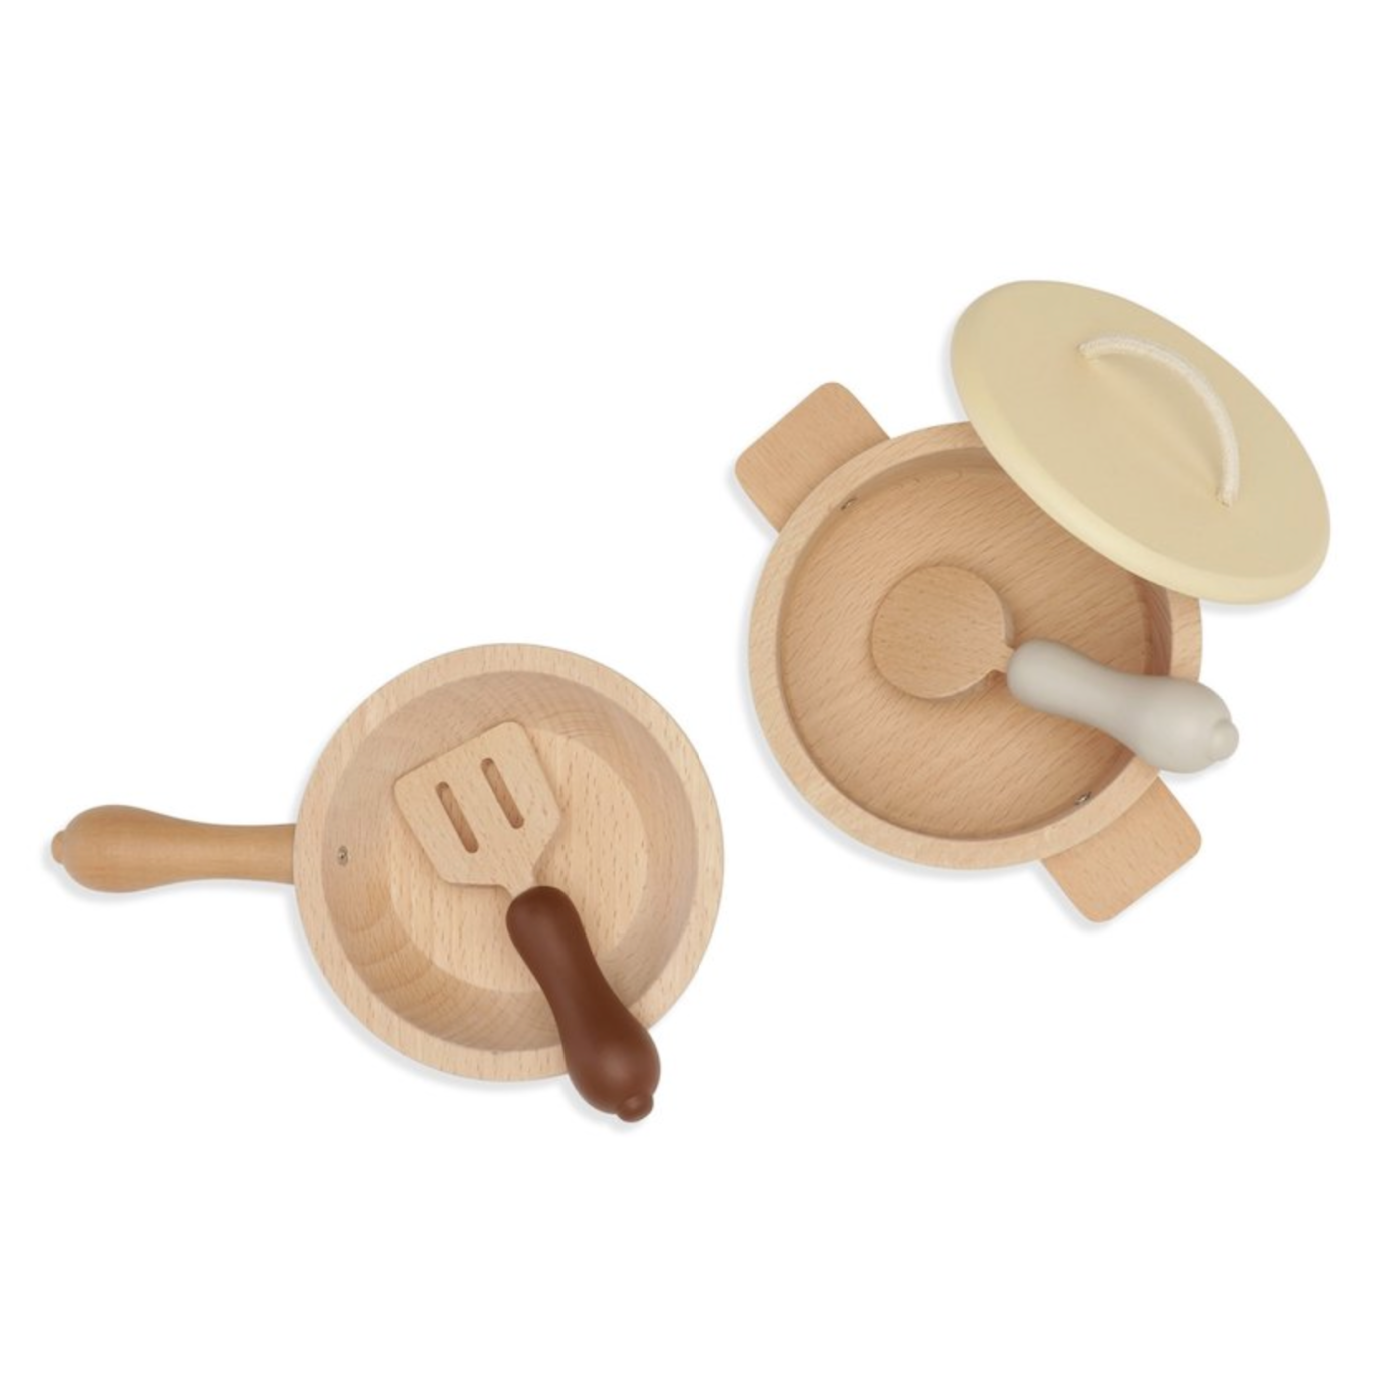 Wooden Pots and Pans Playset